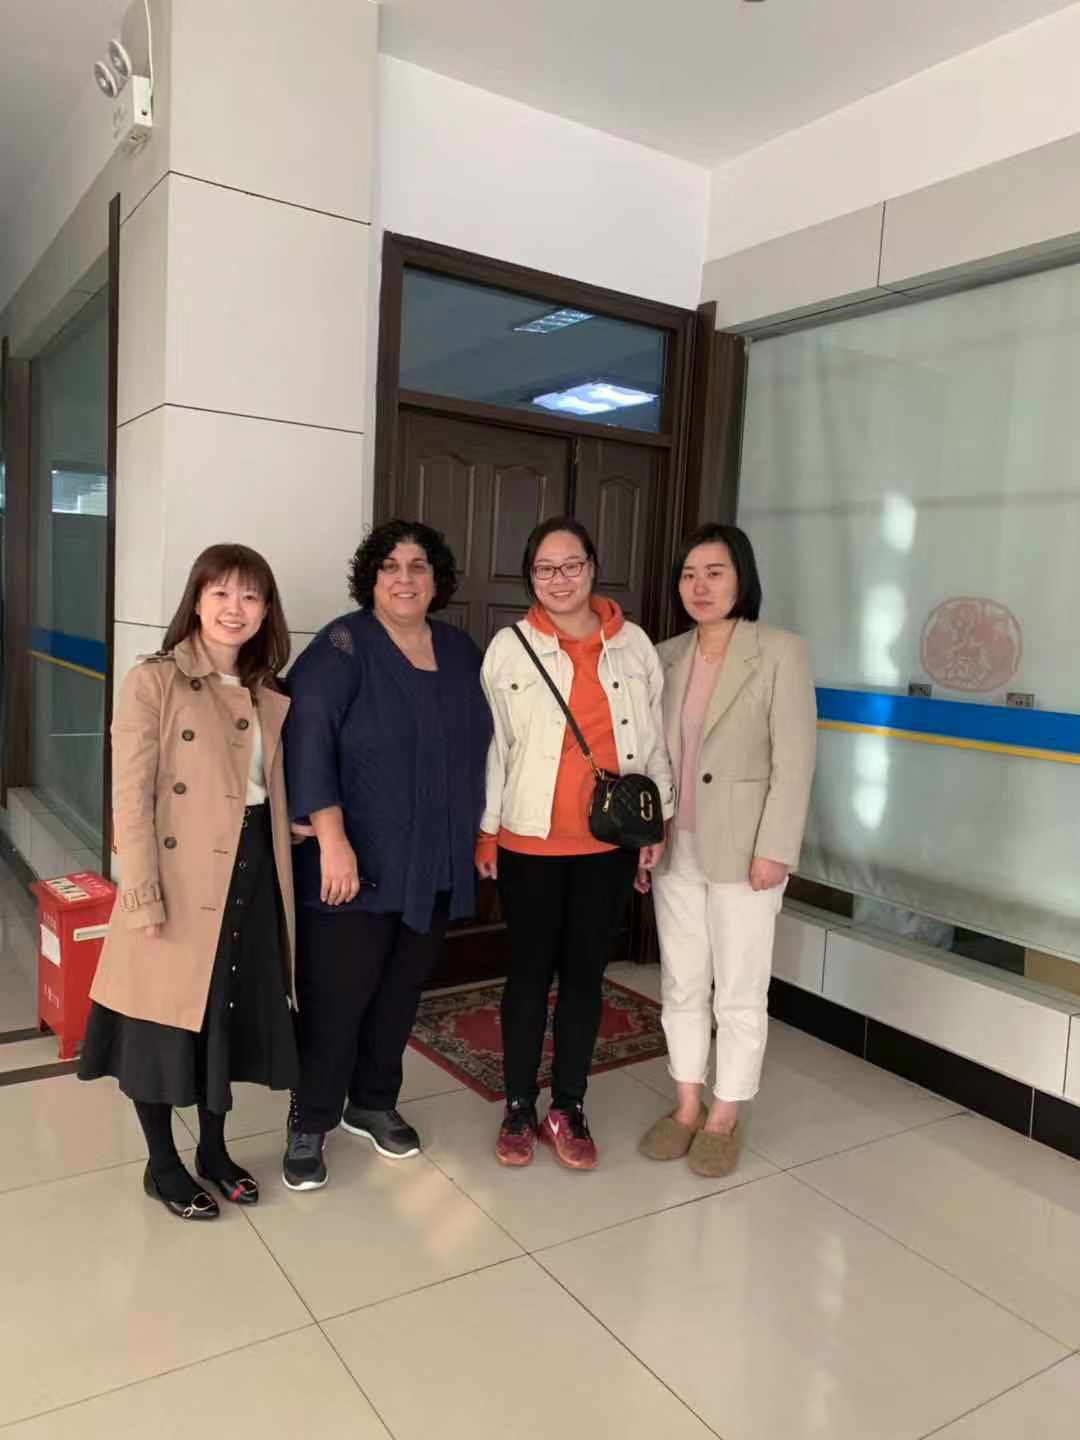 Warmly welcome our client QOSMEDIX from USA to come to our company for visit